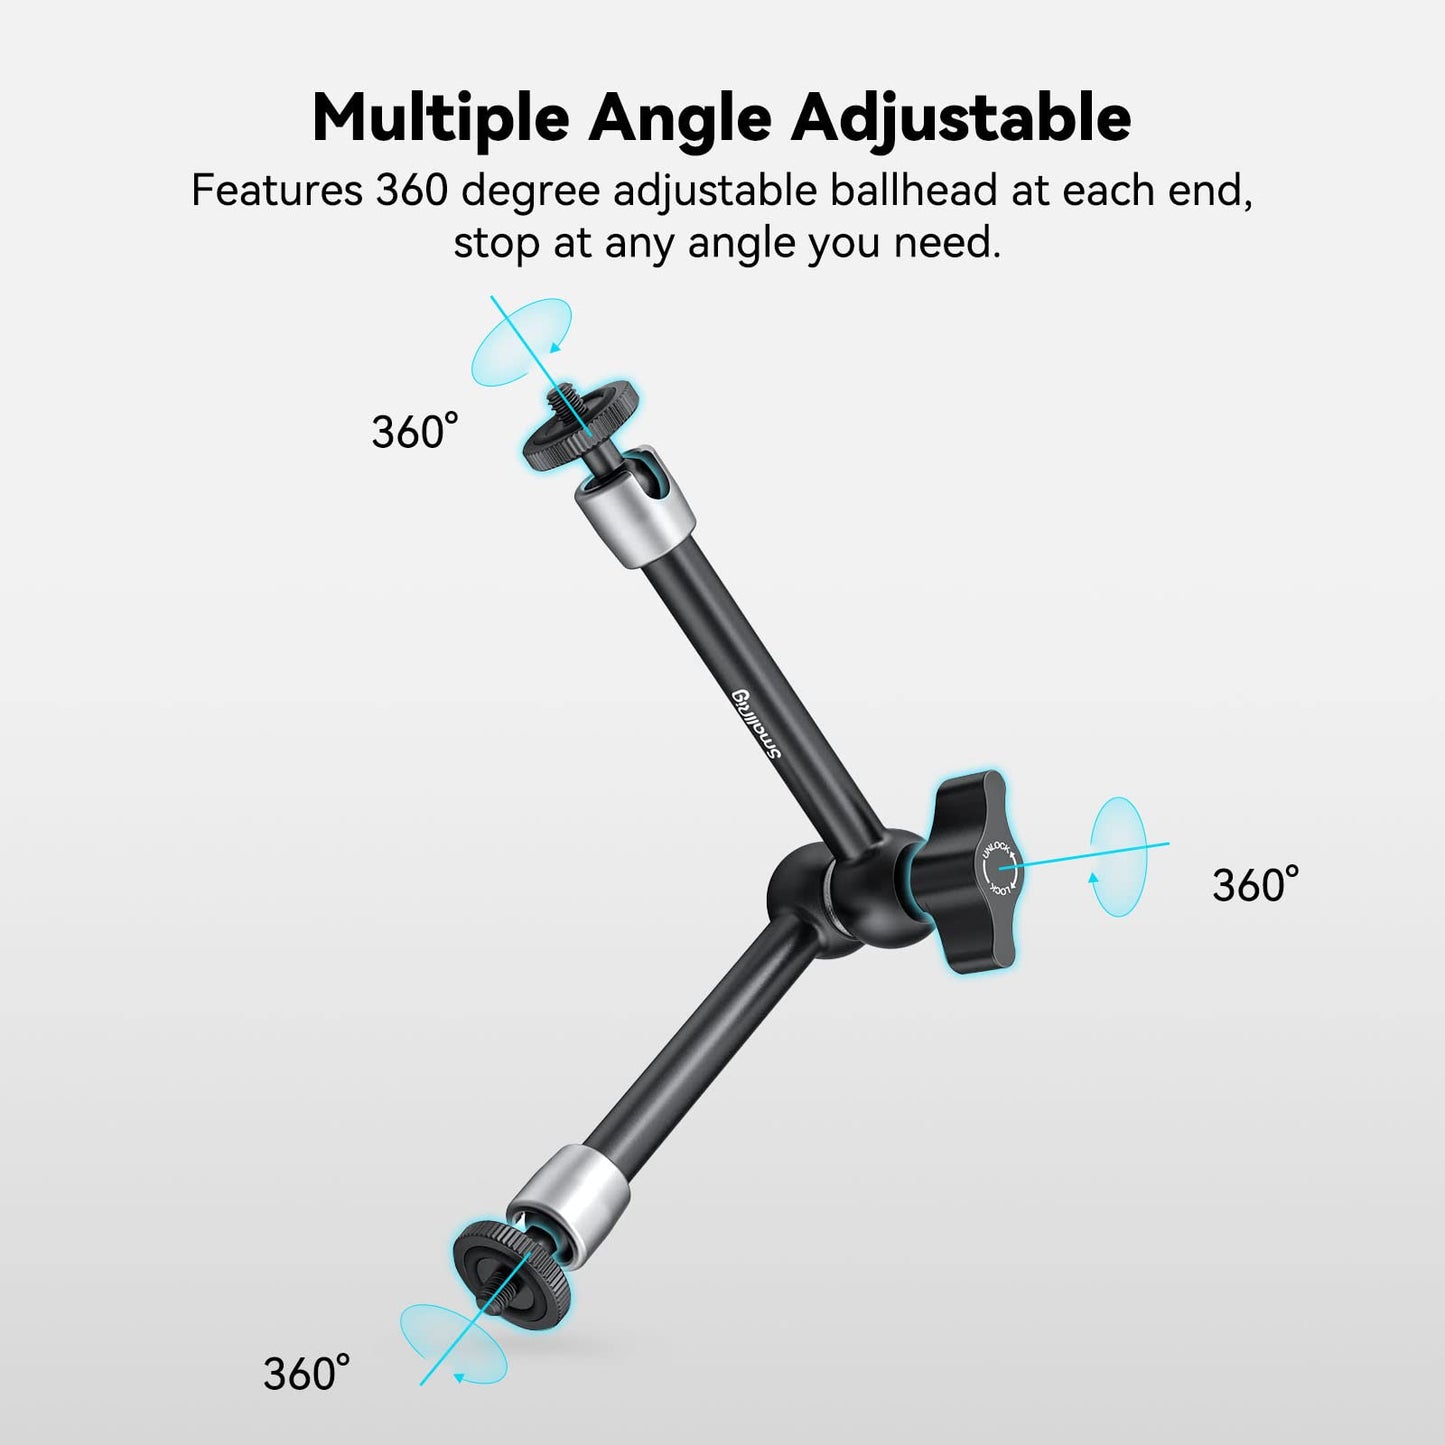 SmallRig 9.8 inch Adjustable Articulating Magic Arm with Both 1/4" Thread Screw for LCD Monitor/LED Lights - 2066B